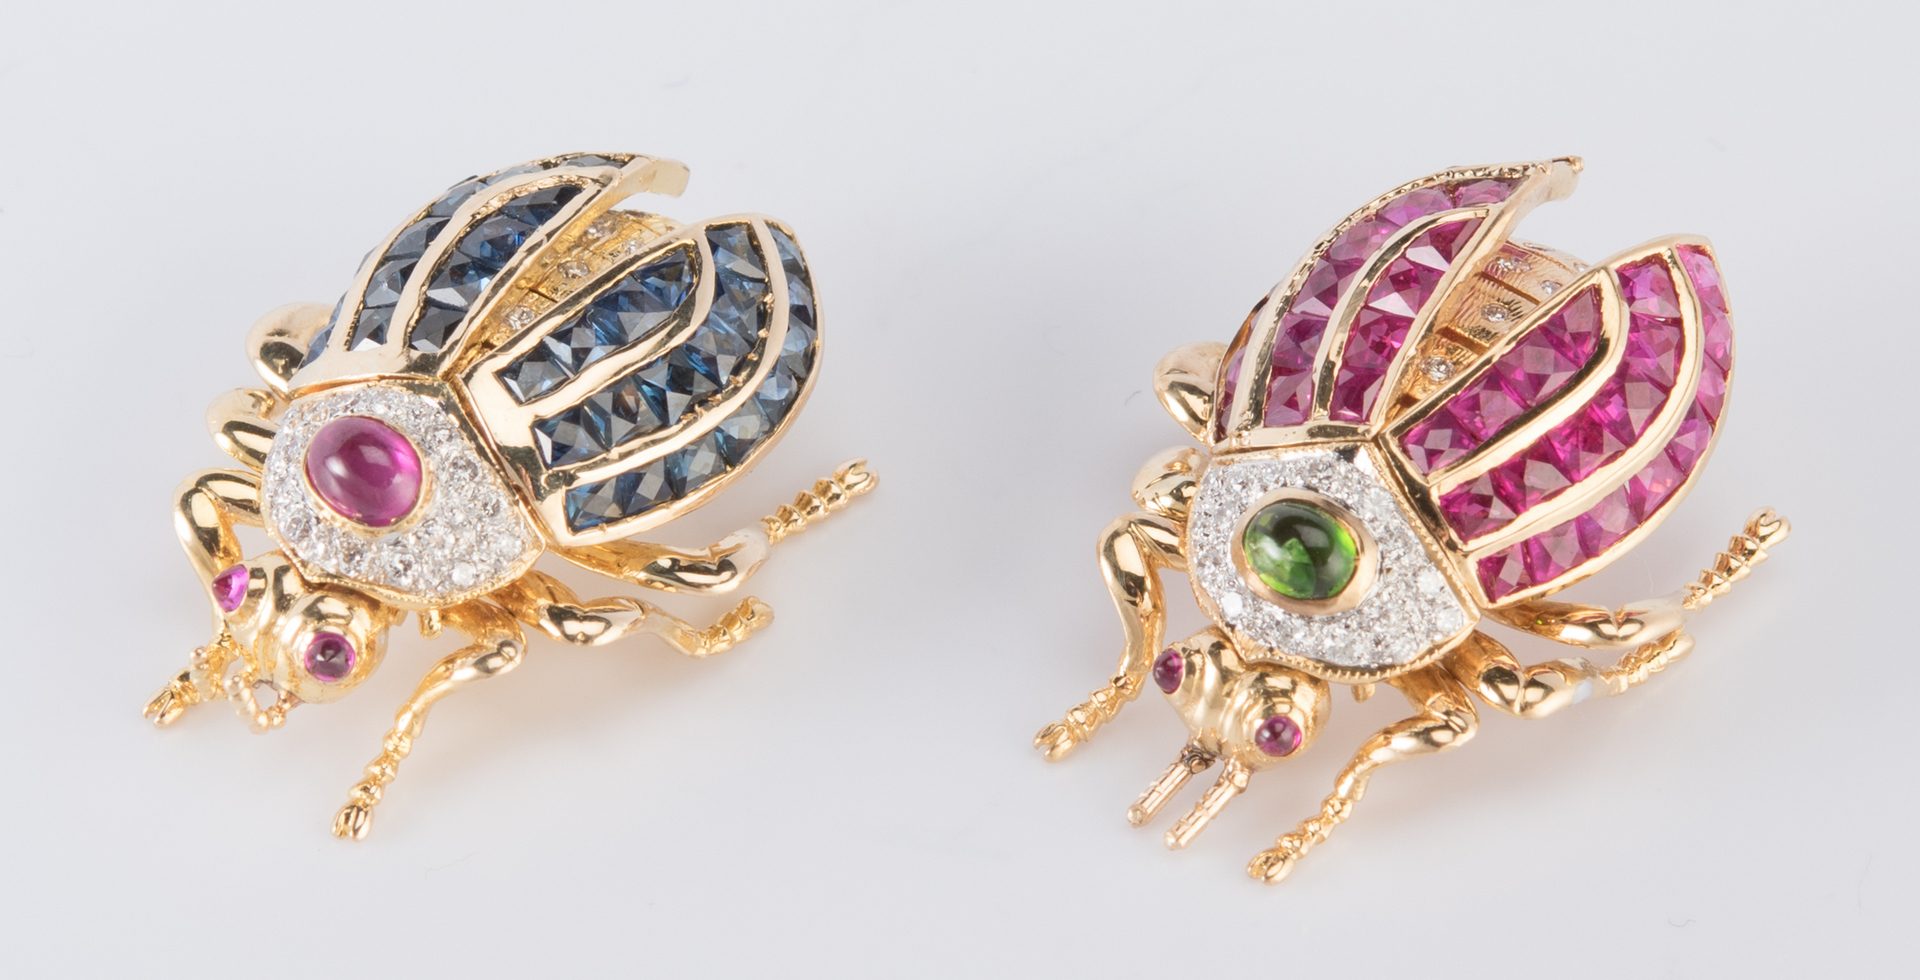 Lot 42: 2 Jeweled Beetle Movable Pins